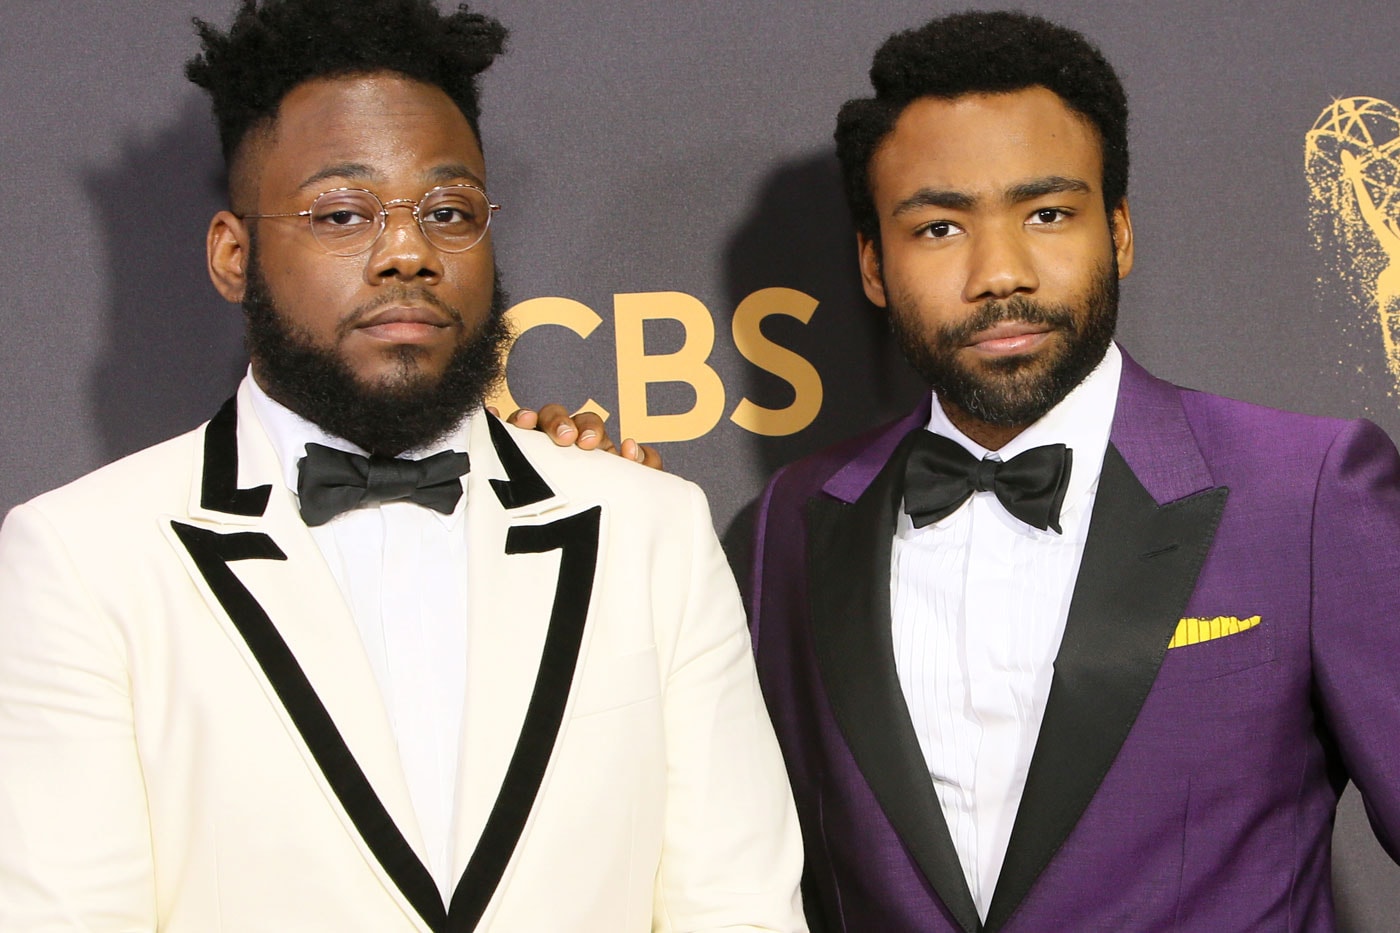 Donald Stephen Glover Respond to Criticism Atlanta Only for White People